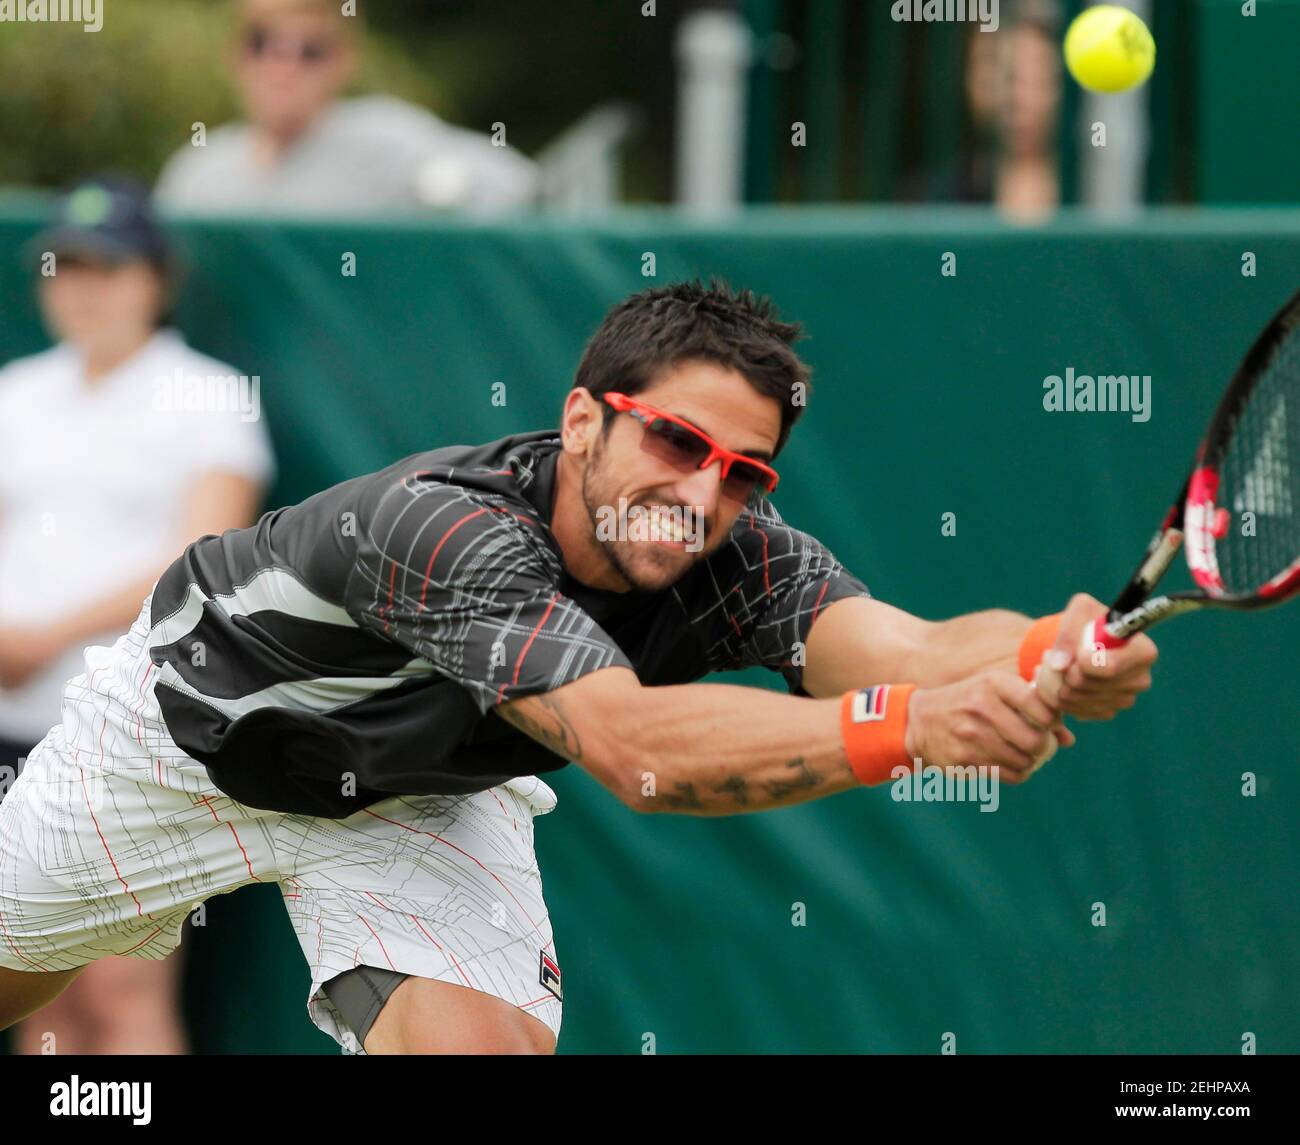 Tennis - The Boodles Challenge - Andy Murray v Janko Tipsarevic - Stoke  Park, Buckinghamshire - 20/6/12 Serbia's Janko Tipsarevic in action  Mandatory Credit: Action Images / John Marsh Livepic Stock Photo - Alamy